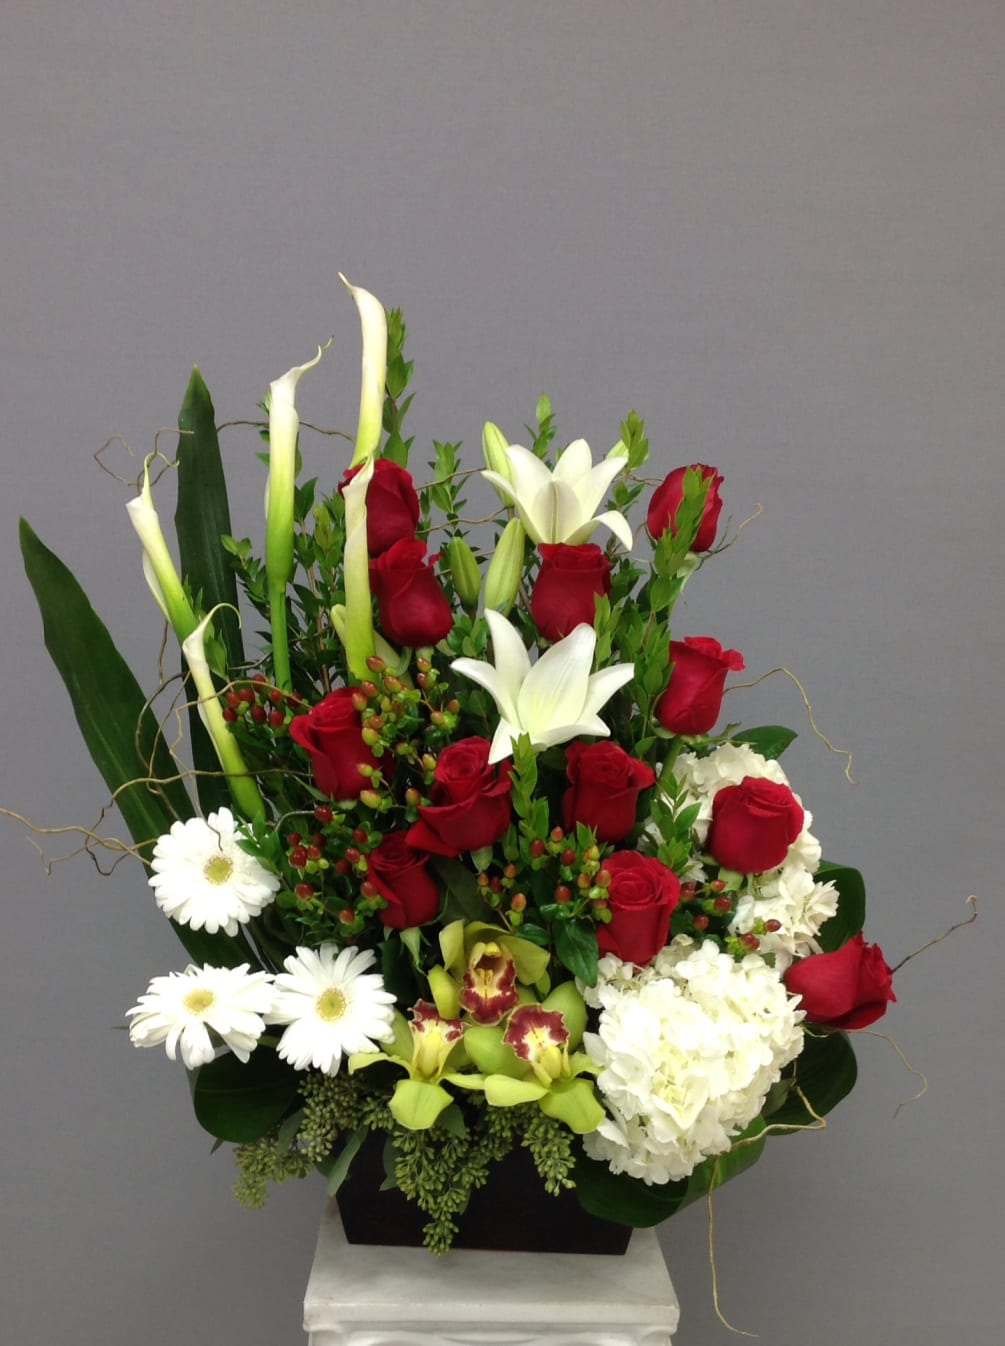 Red and white arrangement designed for Holiday season